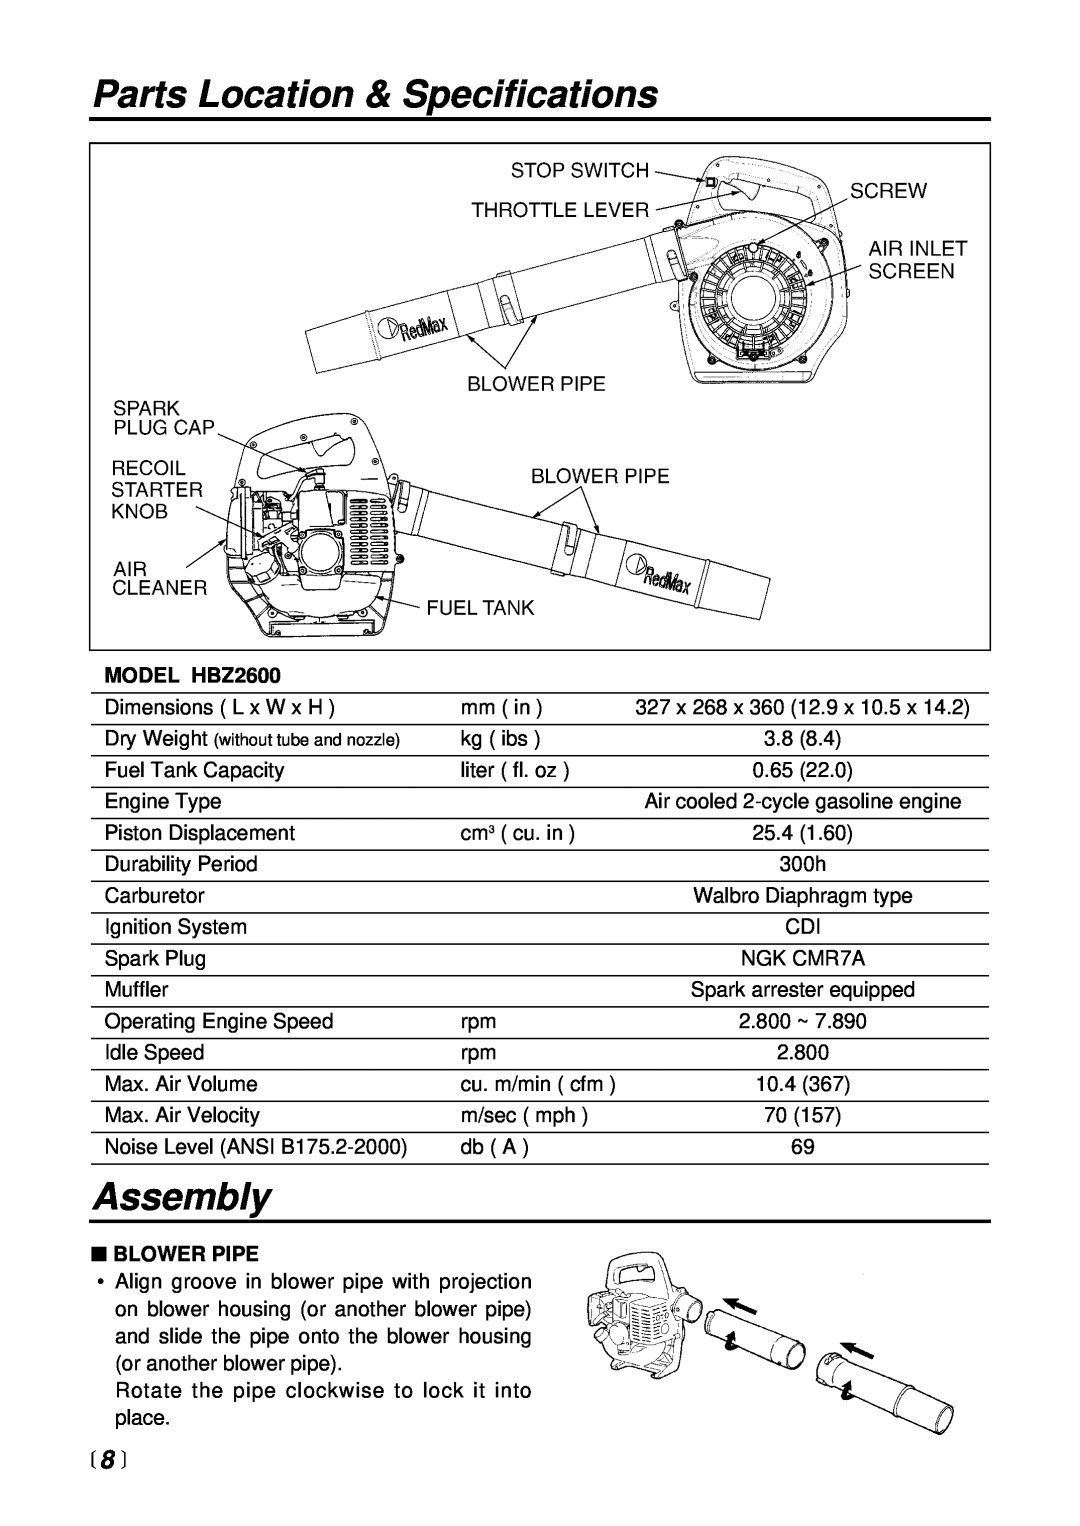 RedMax manual Parts Location & Specifications, Assembly, 8 , MODEL HBZ2600, Blower Pipe 